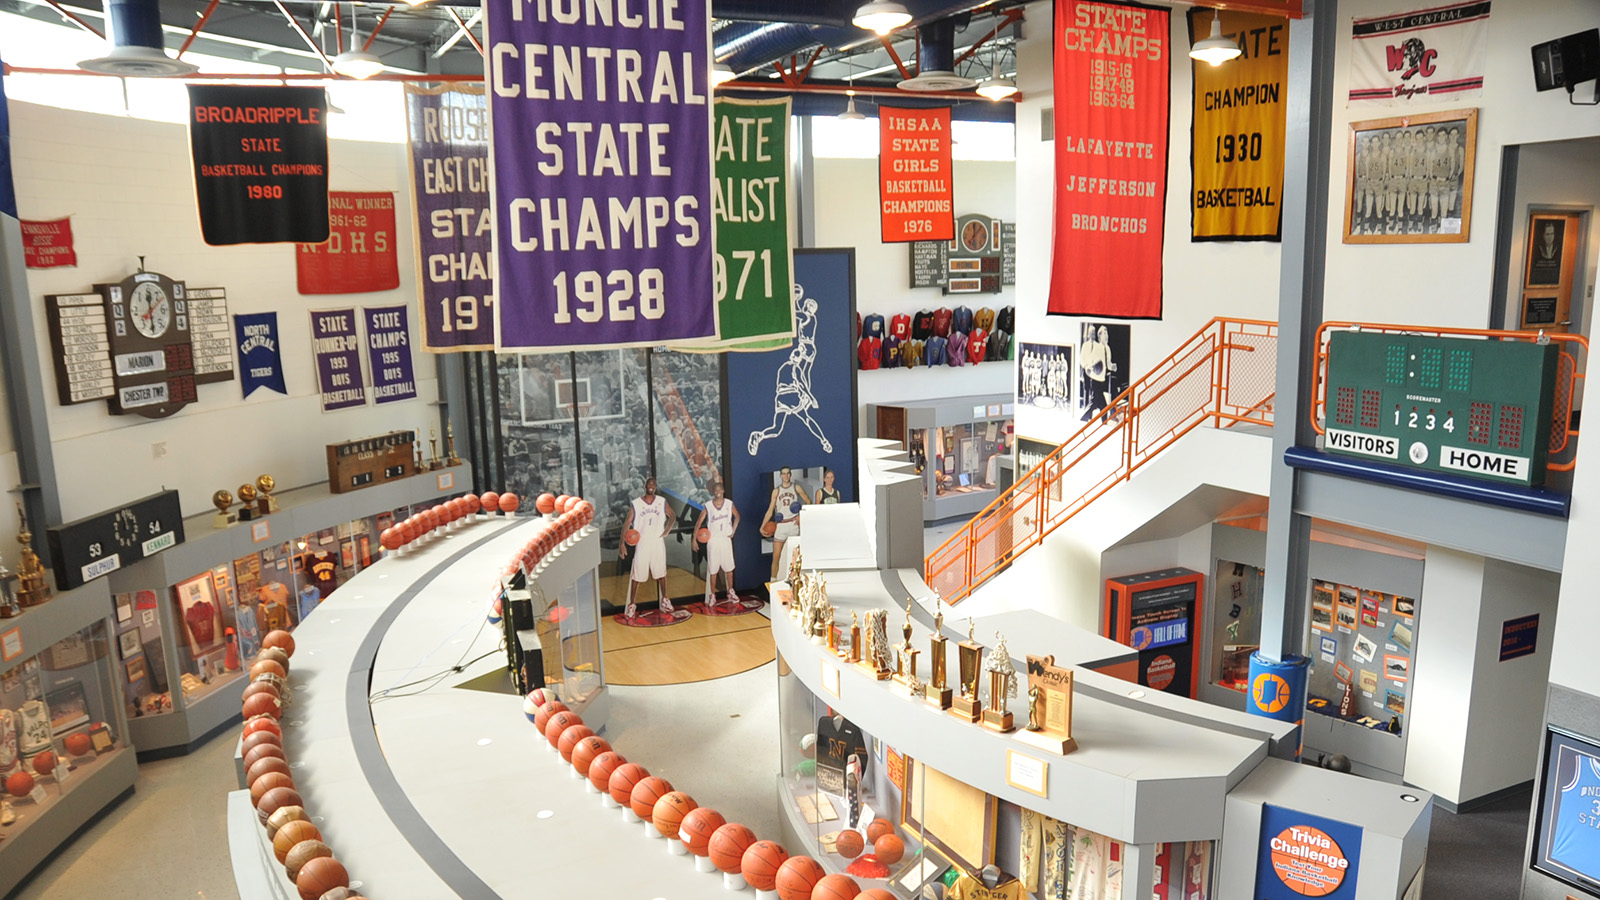 Memorabilia including jerseys, trophies, pendants, and plaques on display at the Indiana Basketball Hall of Fame